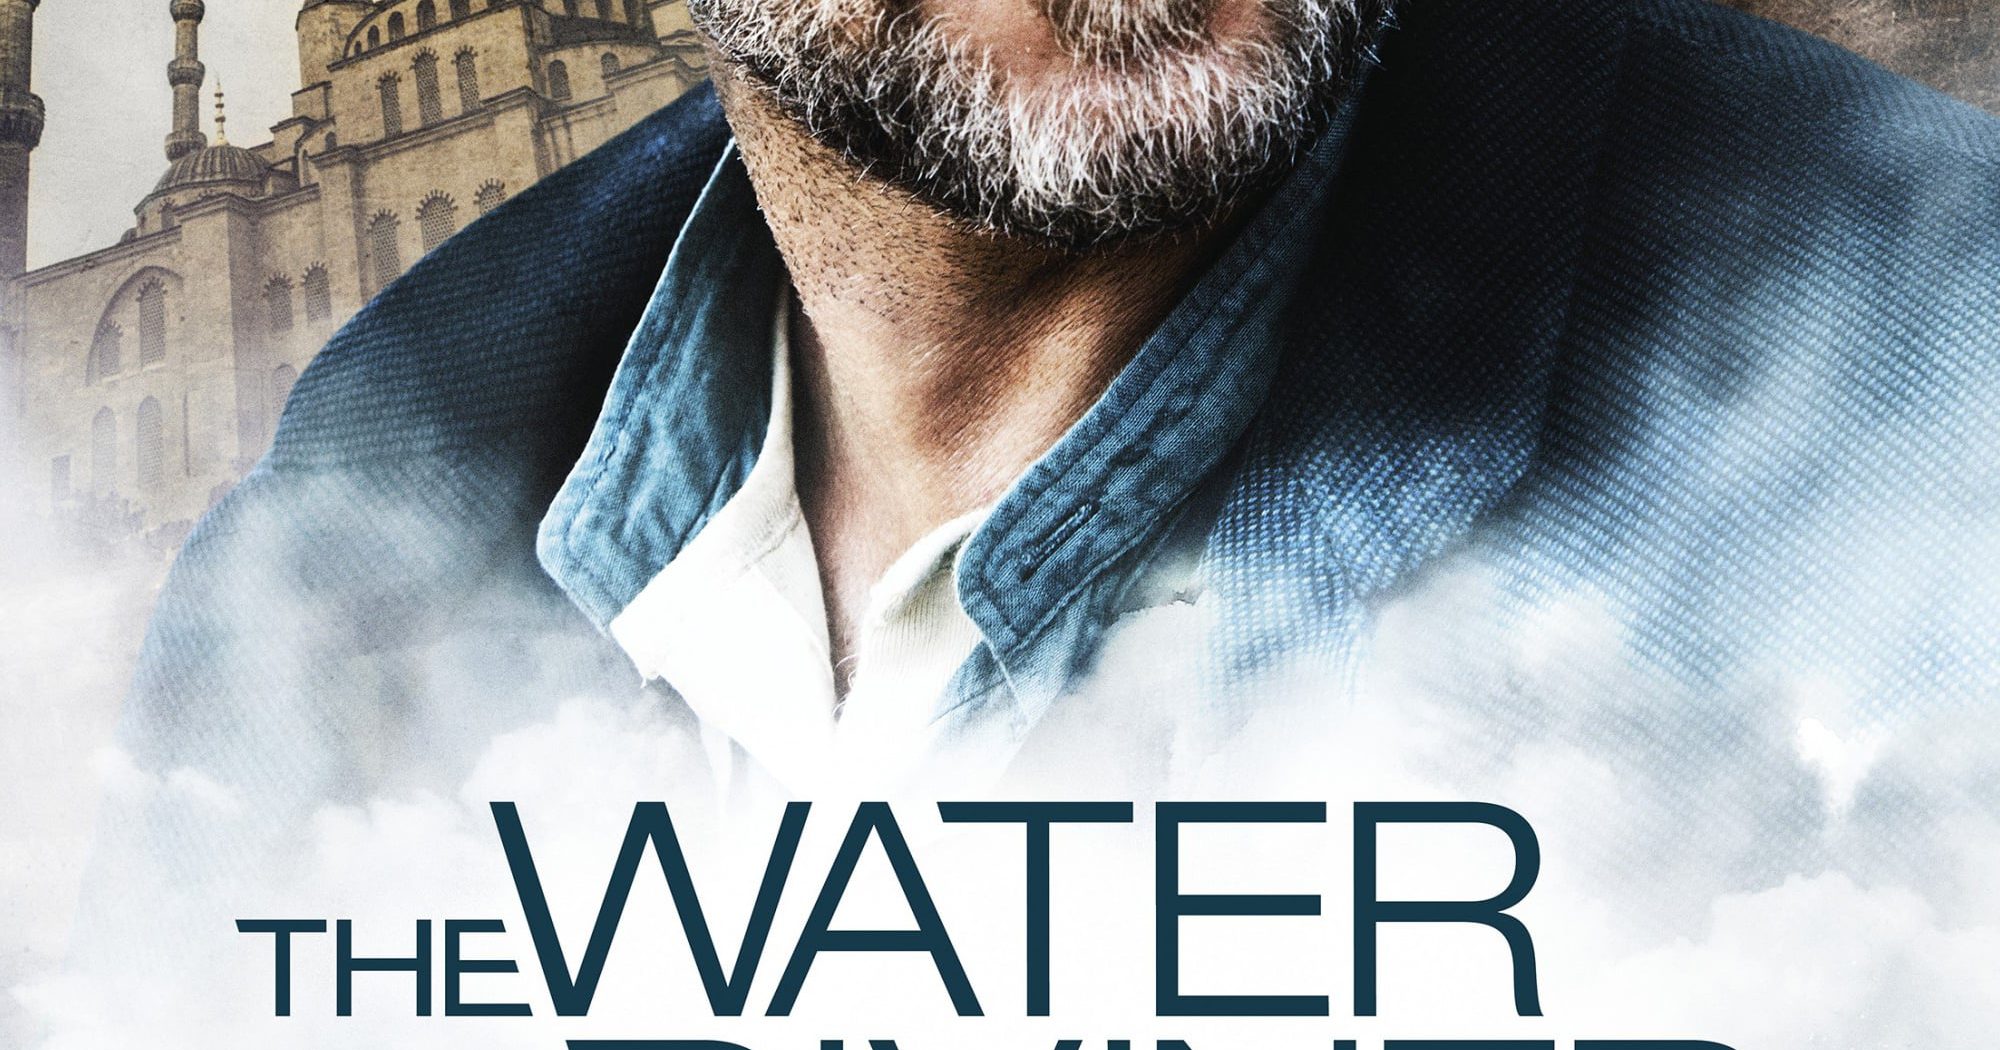 Poster for the movie "The Water Diviner"